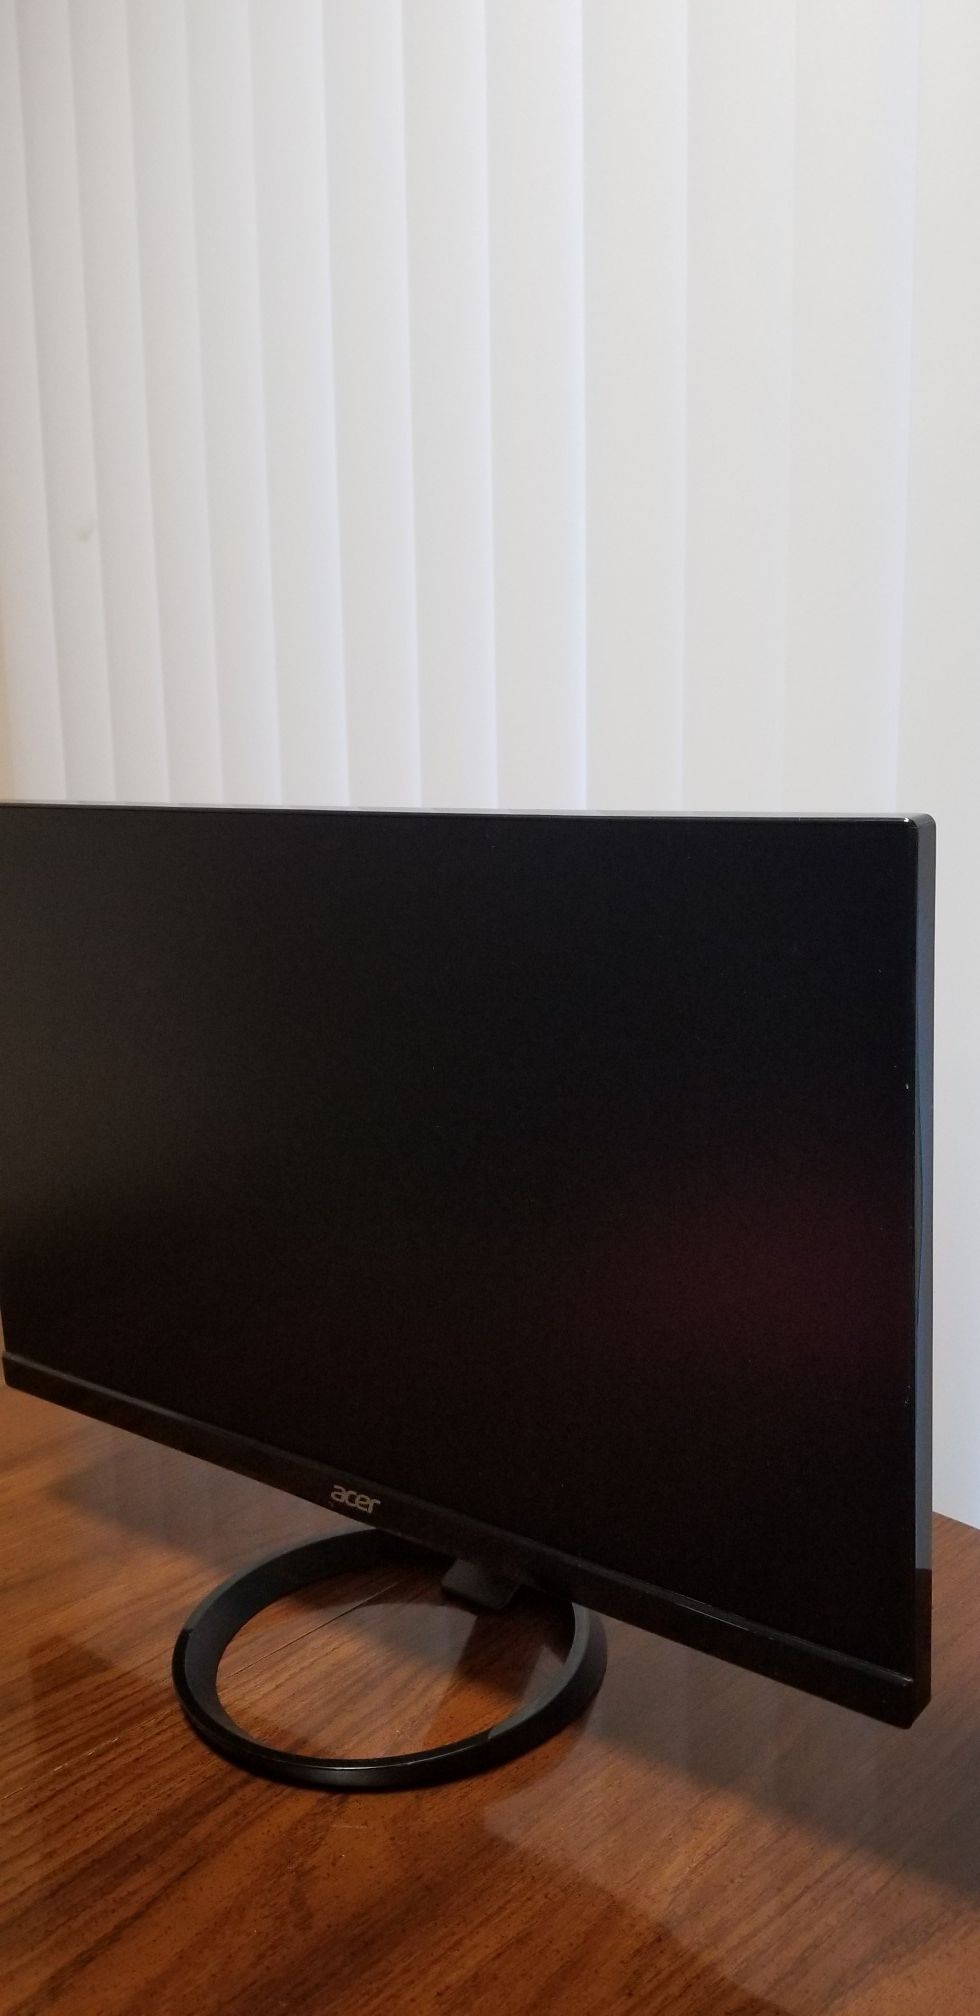 Acer Monitor 23.8 inch. (1920 x 1080) Widescreen Monitor.